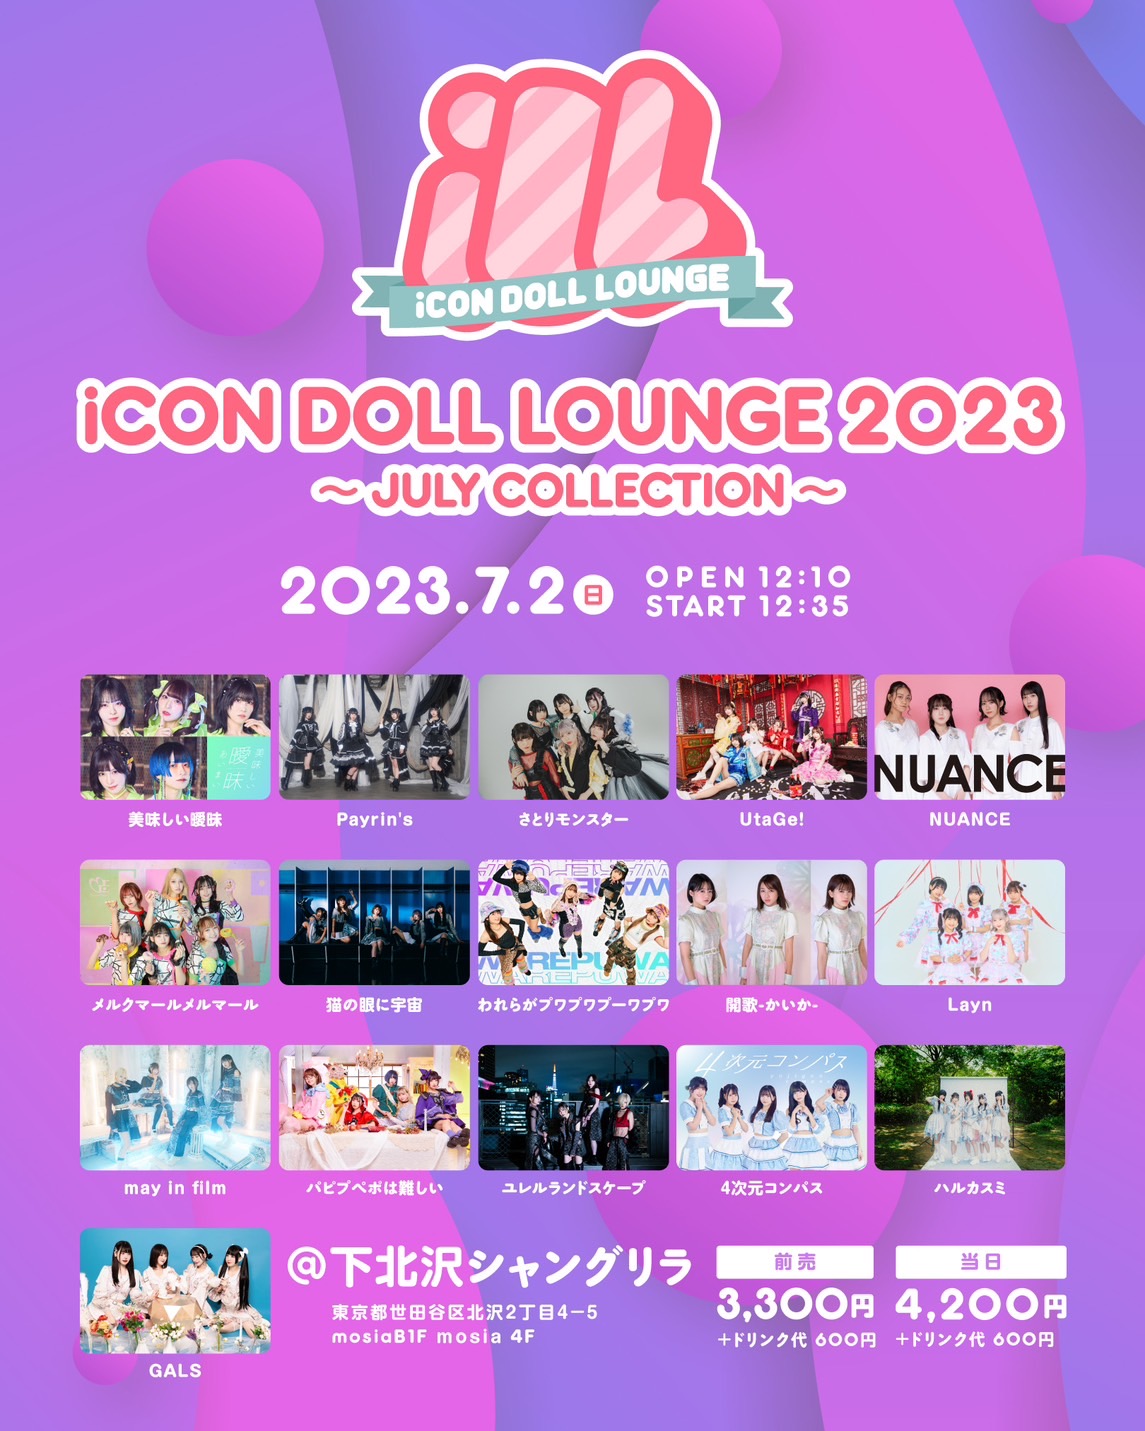 iCON DOLL LOUNGE2023 〜 JULY COLLECTION 〜